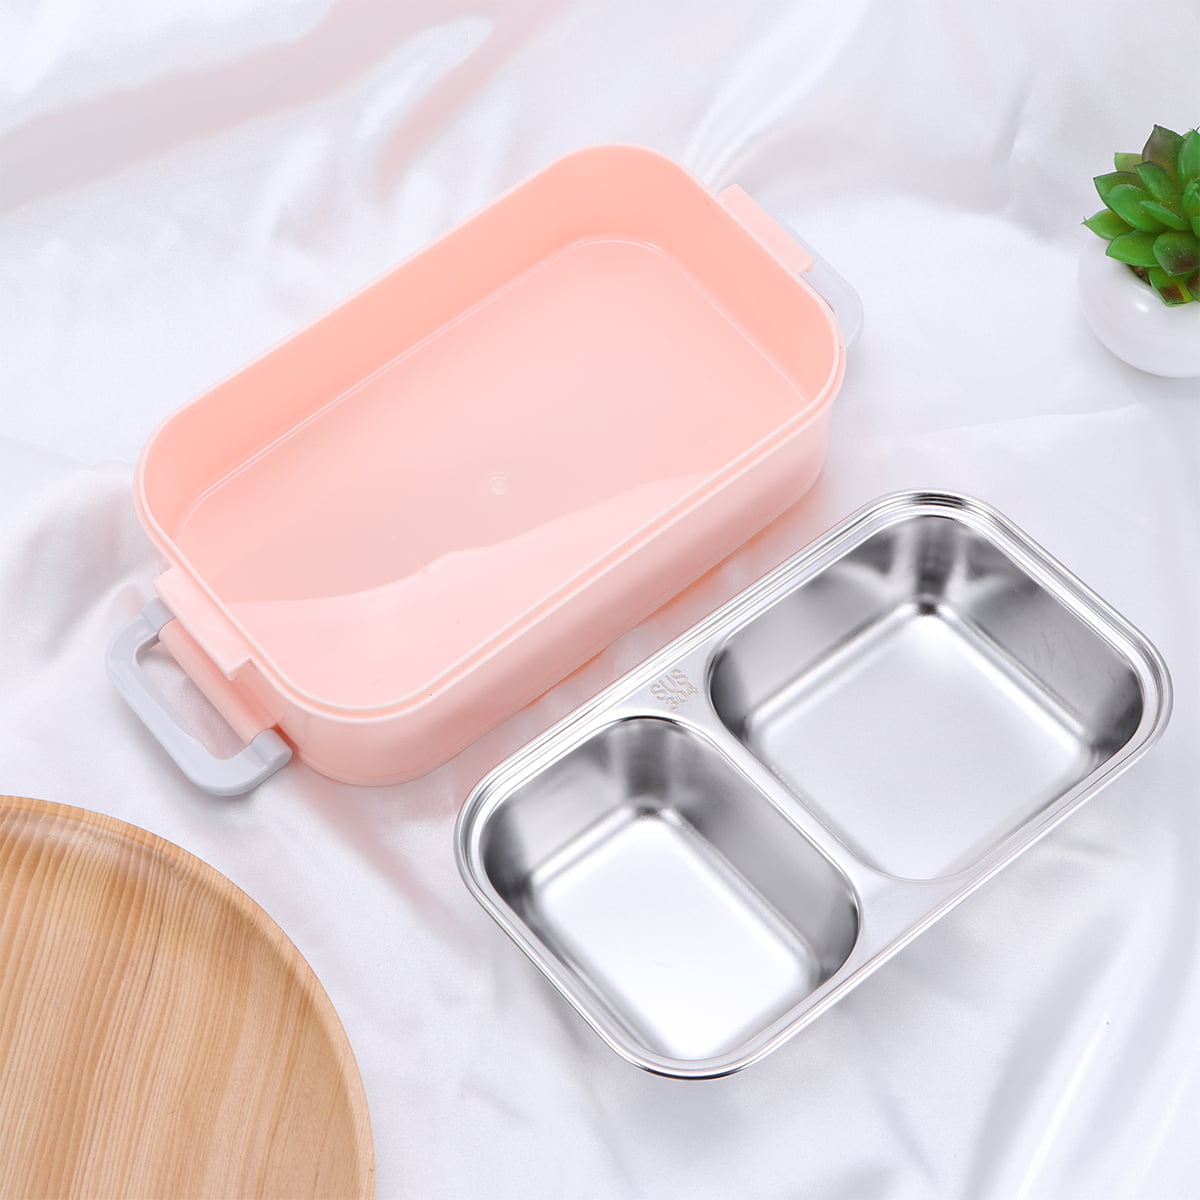  VALINK Lunch Box Containers for Hot Food, Portable Rectangular Lunch  Box Stainless Steel Insulated Food Storage Container for Outdoor Camping  Picnic: Home & Kitchen